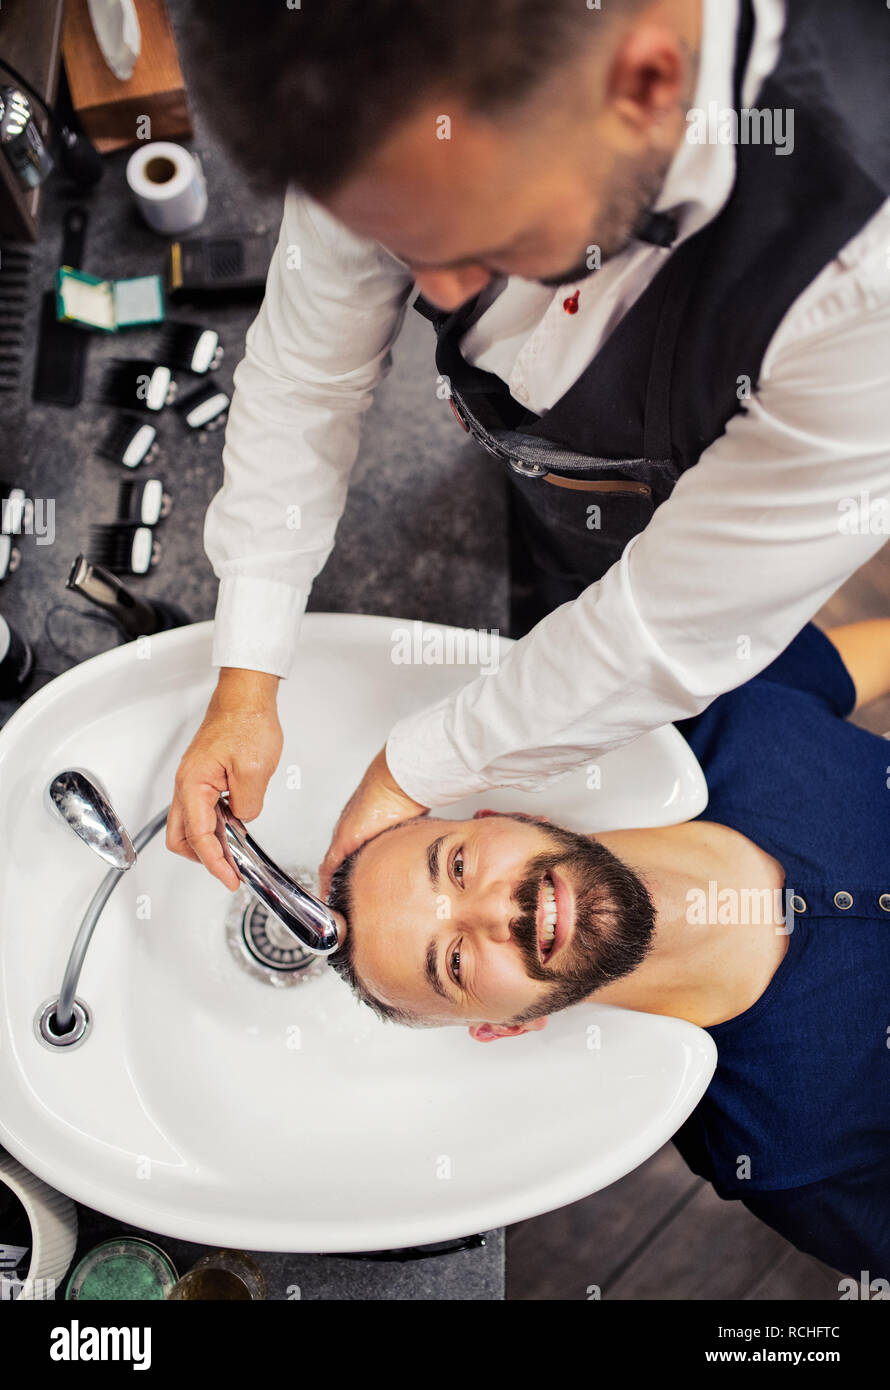 A top view of hipster man client visiting haidresser and hairstylist in barber shop. Stock Photo